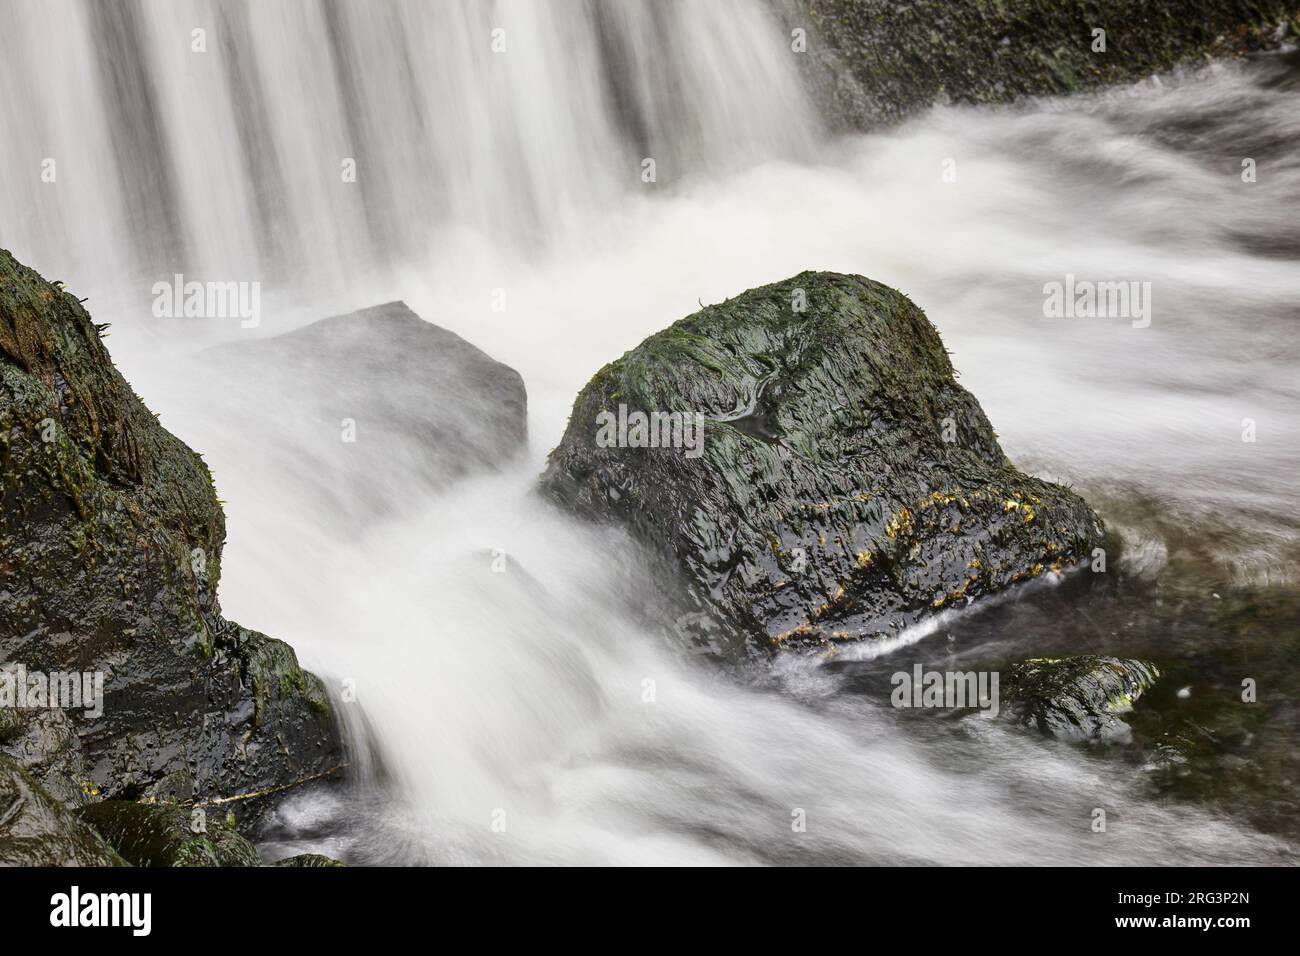 Water crashes onto rocks at the base of a vertical waterfall, on the coast at Speke's Mill Mouth, near Hartland Quay, Devon, Great Britain. Stock Photo